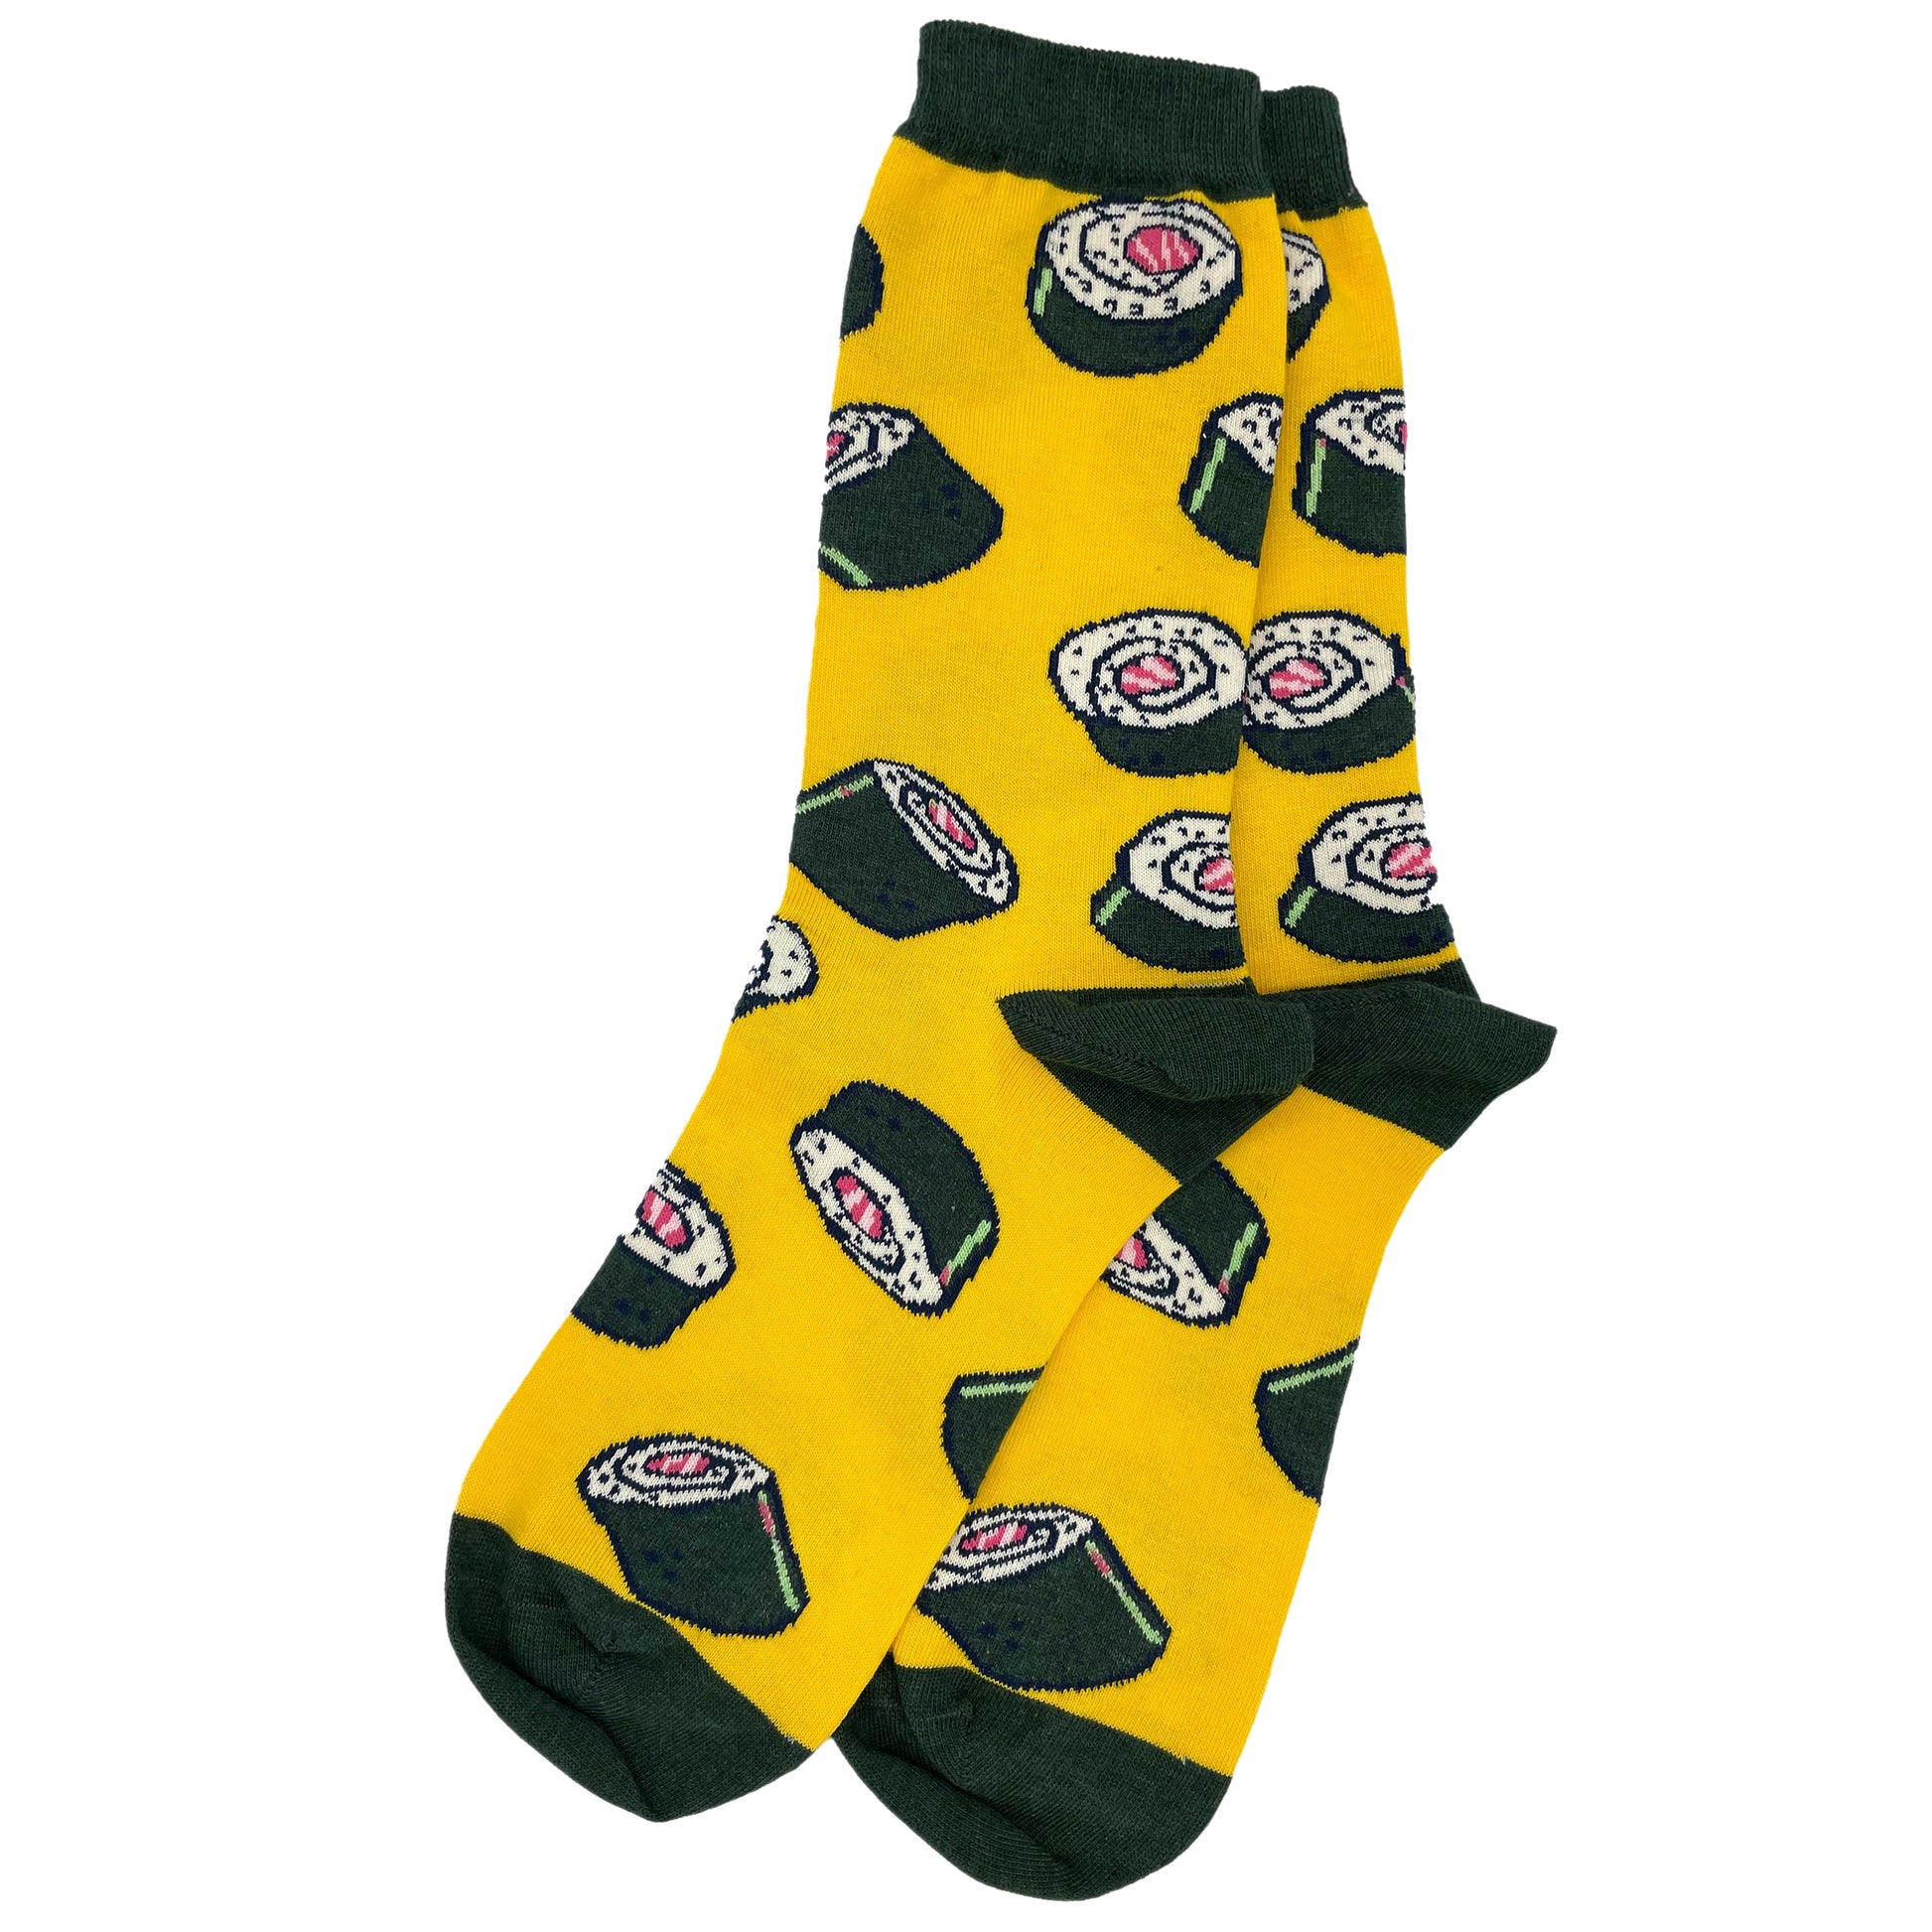 A pair of bright yellow socks patterned with sushi rolls lie flat against a white background. The welt, heel and toe of each sock are dark green to match the seaweed in the sushi rolls.